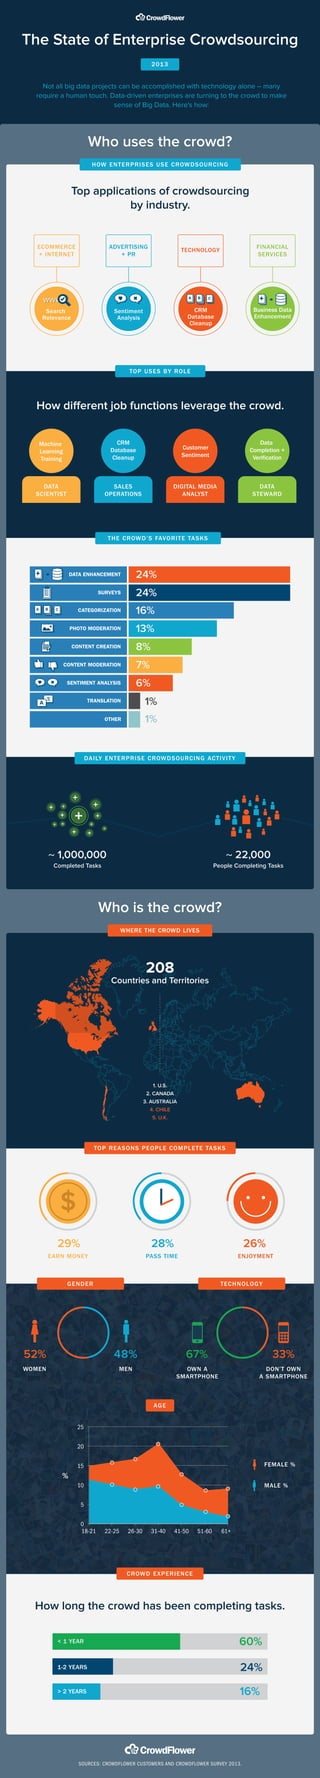 The State of Enterprise Crowdsourcing
2013

Not all big data projects can be accomplished with technology alone – many
require a human touch. Data-driven enterprises are turning to the crowd to make
sense of Big Data. Here's how:

Who uses the crowd?
H OW E NTE RPRIS E S U SE CROWDSOU RCING

Top applications of crowdsourcing
by industry.

ECOMMERCE
+ INTERNET

ADVERTISING
+ PR

TECHNOLOGY

Search
Relevance

Sentiment
Analysis

CRM
Database
Cleanup

FINANCIAL
SERVICES

Business Data
Enhancement

TOP U SE S B Y ROL E

How different job functions leverage the crowd.
Machine
Learning
Training

CRM
Database
Cleanup

Customer
Sentiment

Data
Completion +
Verification

DATA
SCIENTIST

SALES
OPERATIONS

DIGITAL MEDIA
ANALYST

DATA
STEWARD

T H E CROWD’ S FAVORITE TAS KS

DATA ENHANCEMENT

24%

SURVEYS

24%

CATEGORIZATION

16%

PHOTO MODERATION

13%

CONTENT CREATION

8%

CONTENT MODERATION

7%

SENTIMENT ANALYSIS

6%

TRANSLATION

1%

OTHER

1%

DA I LY E N TE RPRIS E CROWDS OU RCING ACTIVI T Y

~ 1,000,000

~ 22,000

Completed Tasks

People Completing Tasks

Who is the crowd?
WHERE THE CROWD LIVES

208
Countries and Territories

1. U.S.
2. CANADA
3. AUSTRALIA
4. CHILE
5. U.K.

TOP RE ASONS PE OPL E COMPL E TE TAS KS

29%

28%

26%

EARN MONEY

PASS TIME

ENJOYMENT

GENDER

TE CHNO LO G Y

52%

48%

67%

33%

WOMEN

MEN

OWN A
SMARTPHONE

DON’T OWN
A SMARTPHONE

AGE
25
20
15

FEMALE %

10

MALE %

%

5
0
18-21

22-25

26-30

31-40

41-50

51-60

61+

CROWD E X PE RIE NCE

How long the crowd has been completing tasks.
< 1 YEAR

60%

1-2 YEARS

24%

> 2 YEARS

16%

SOURCES: CROWDFLOWER CUSTOMERS AND CROWDFLOWER SURVEY 2013.

 